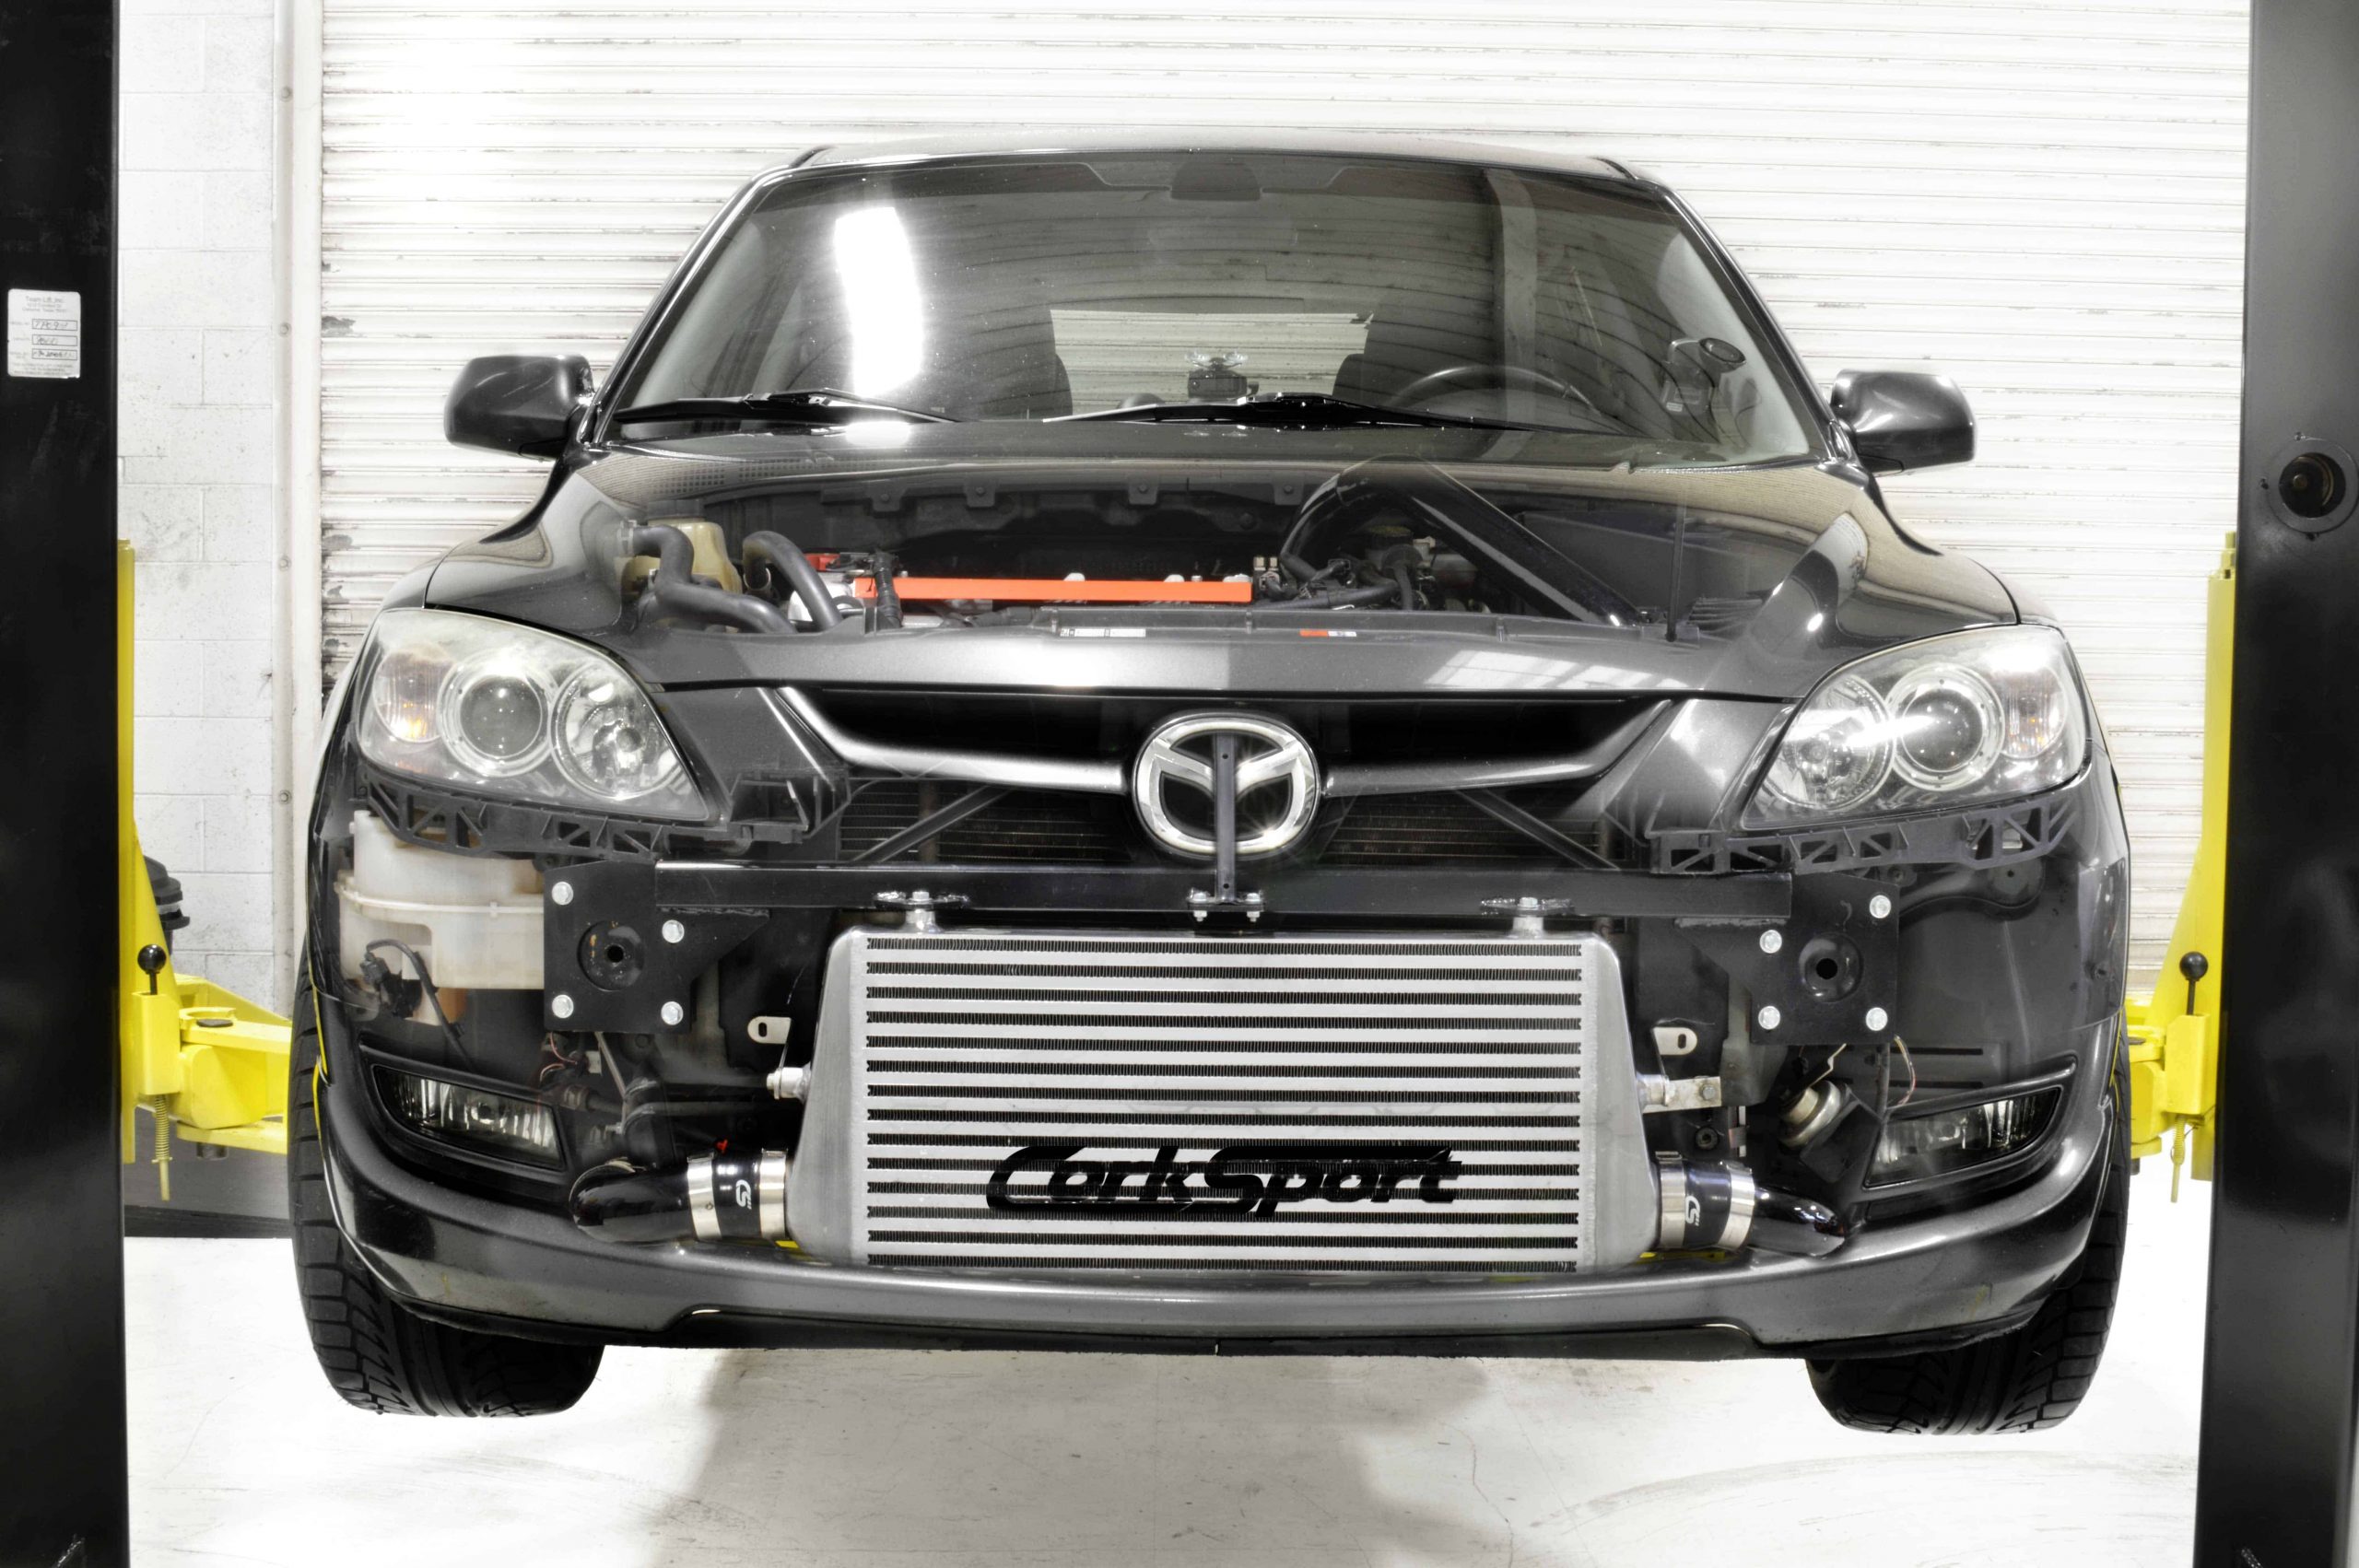 Black Mazdaspeed 3 with Front Mount Intercoole and Crash bar